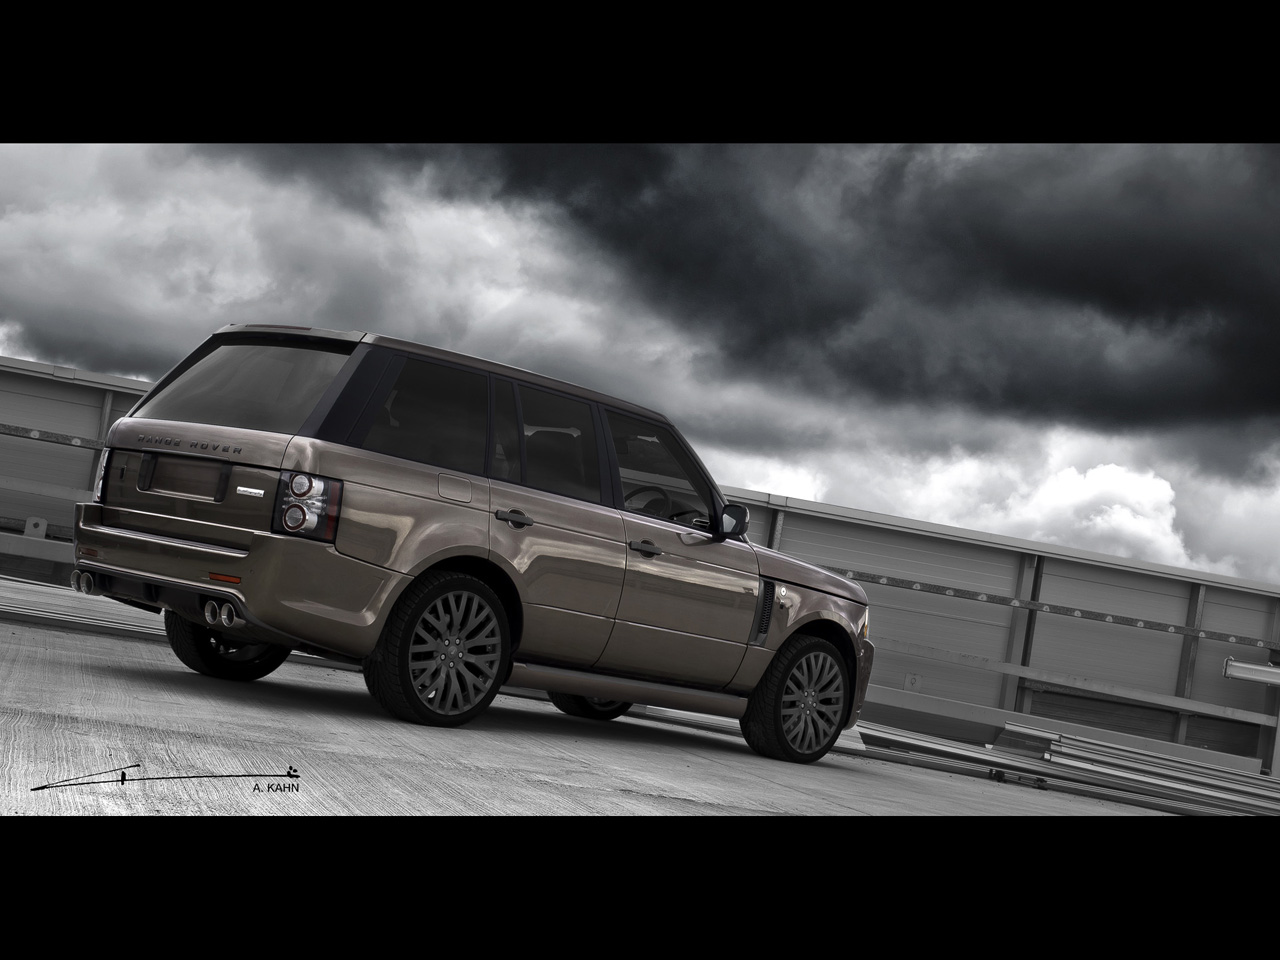 2011 Project Kahn Range Rover RS600 Cosworth